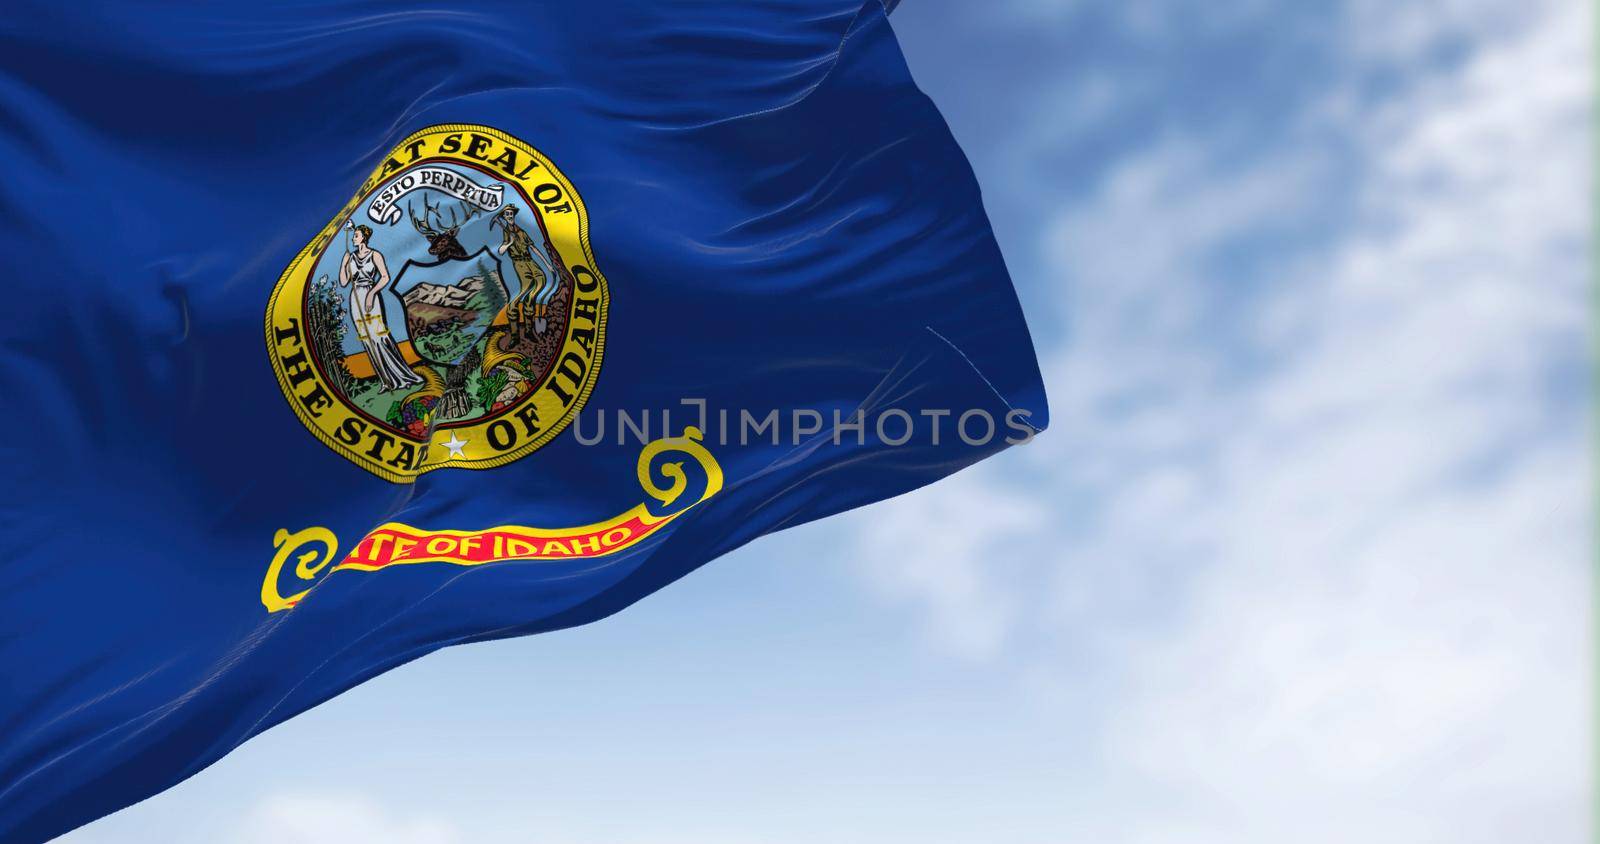 The US state flag of Idaho waving in the wind. Idaho is a state in the Pacific Northwest region of the United States. Democracy and independence.